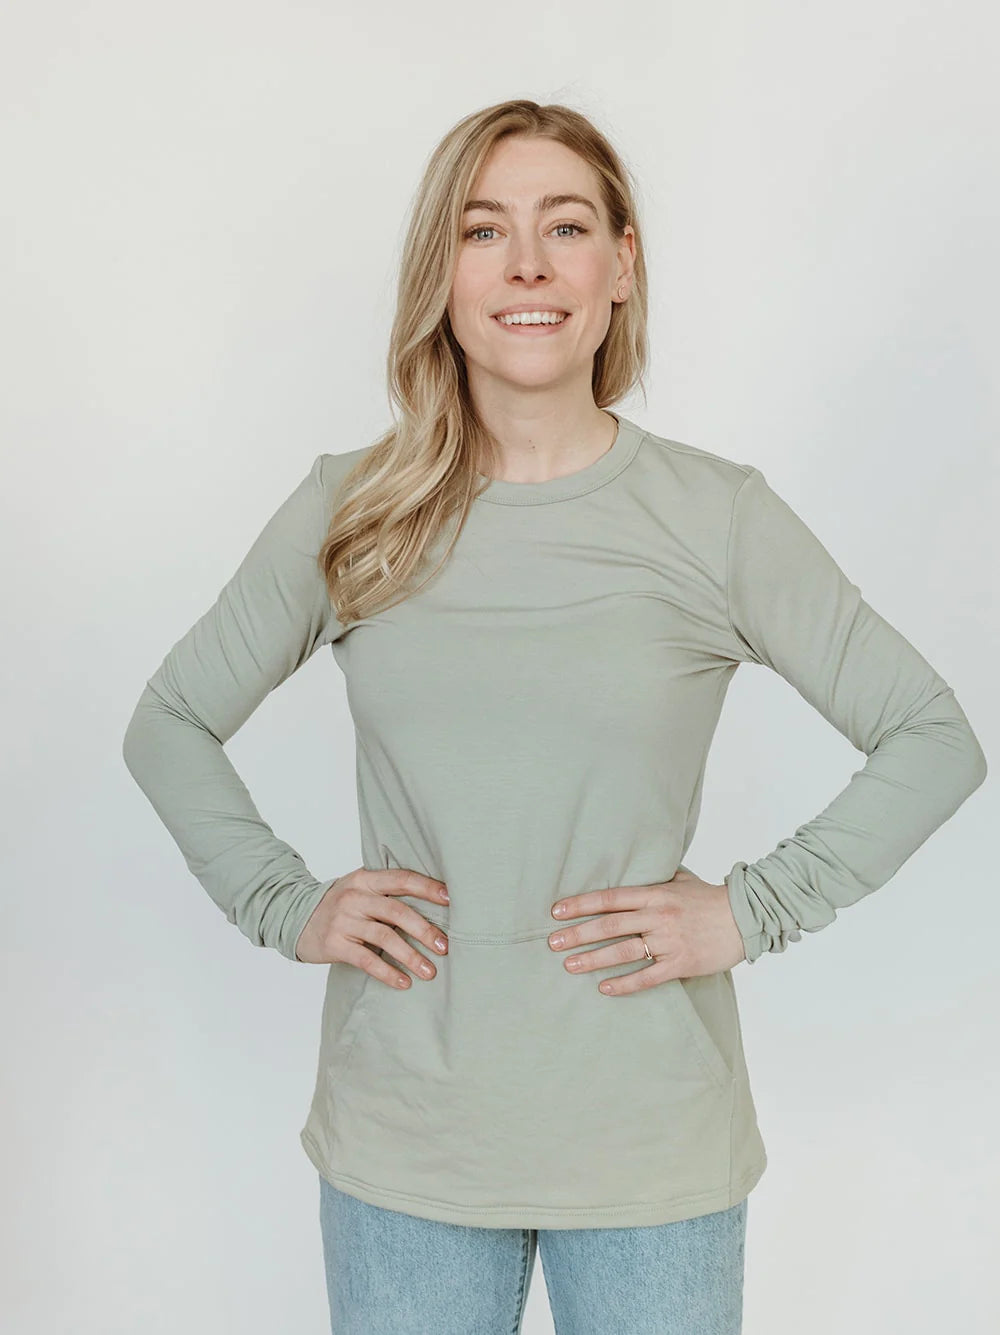 Hillside Sweater by Blondie, light sage, kangaroo pocket, contoured hemline, extra long sleeves, eco-fabric, bamboo rayon, cotton, sizes XS to XL, made in Toronto